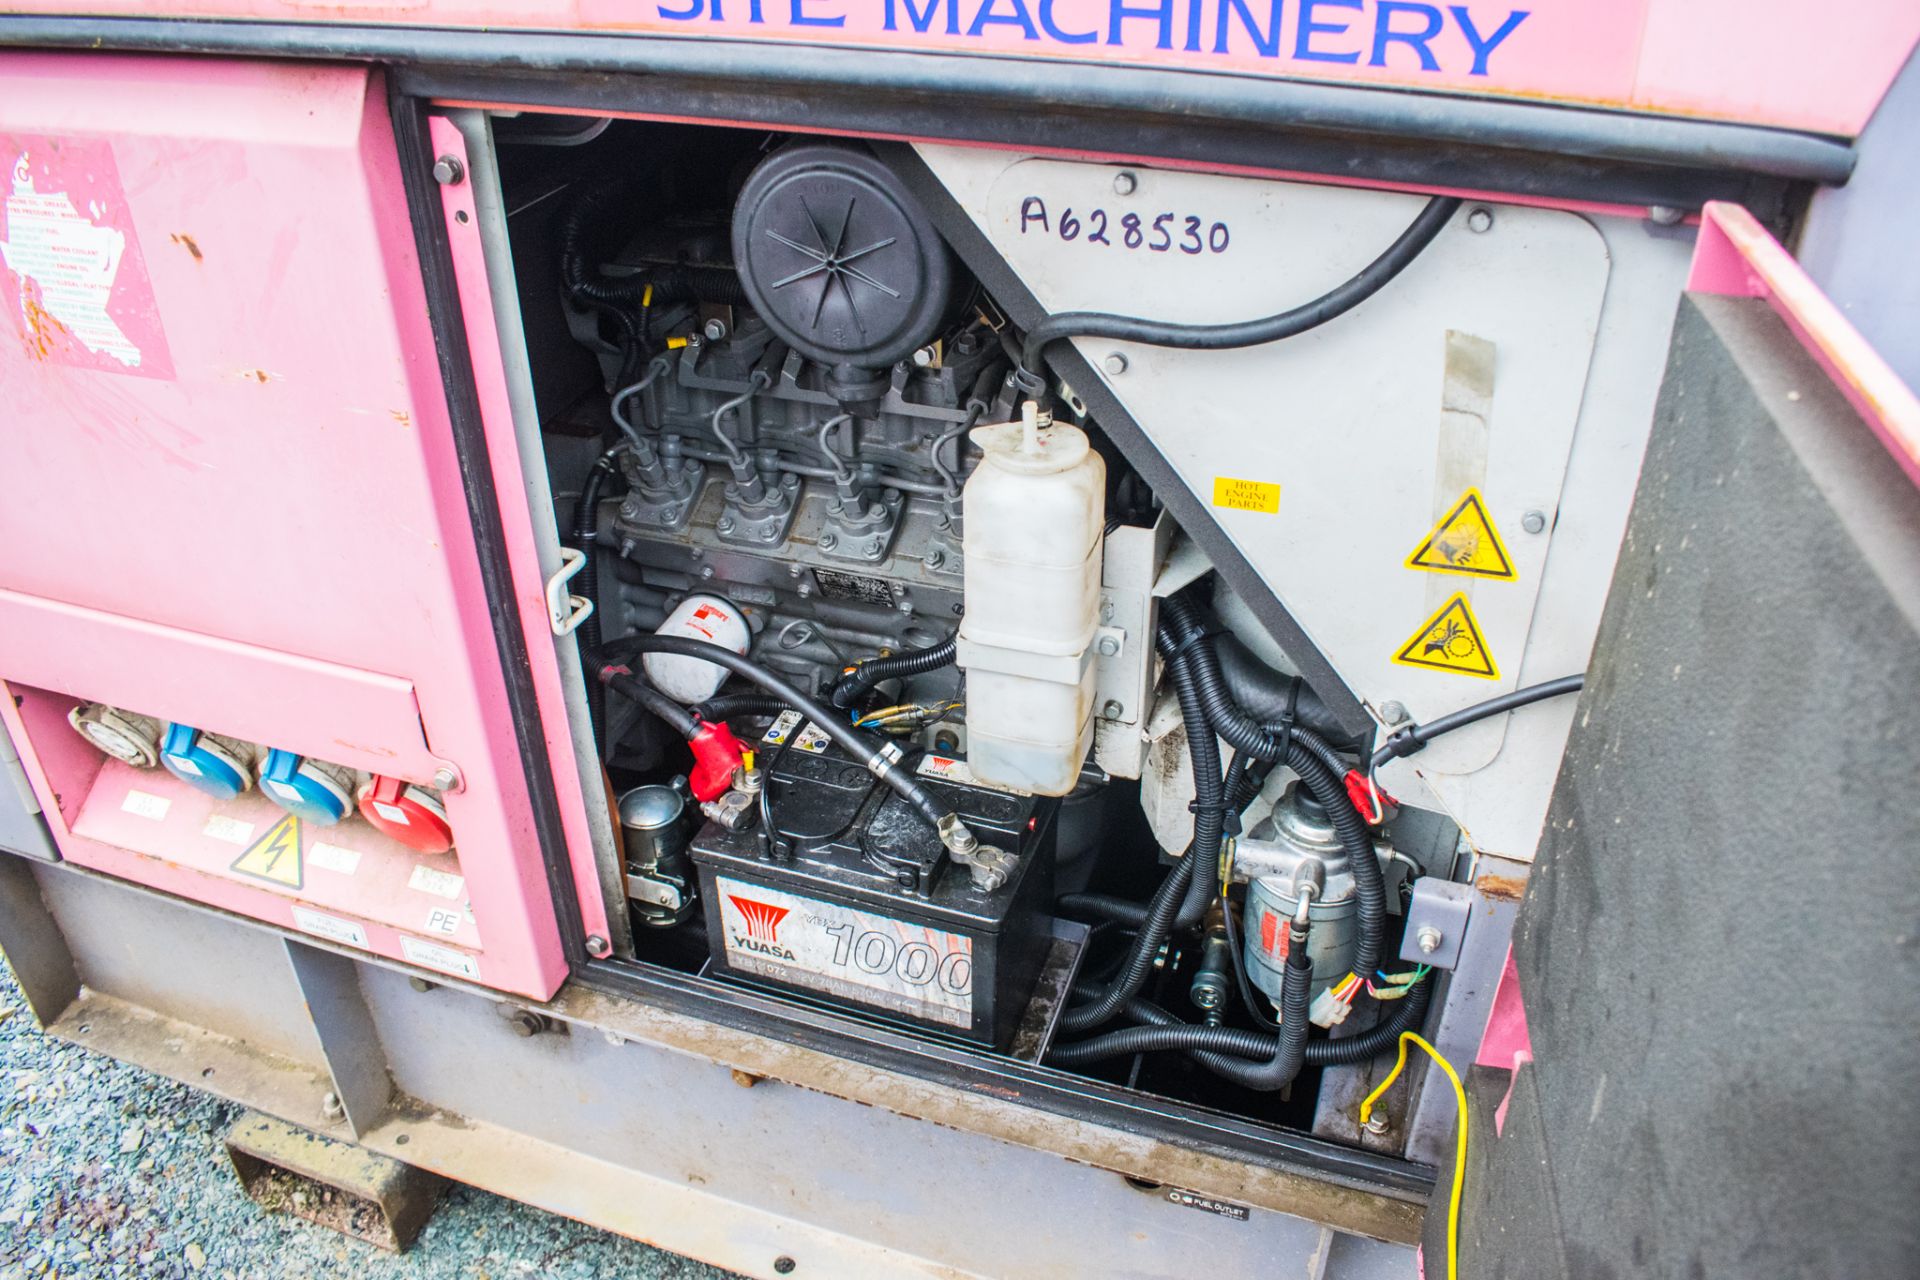 Denyo 25 USE 25 kva diesel driven generator Year: 2012 S/N: 3861359 Recorded Hours: 15150 A628530 - Image 4 of 5